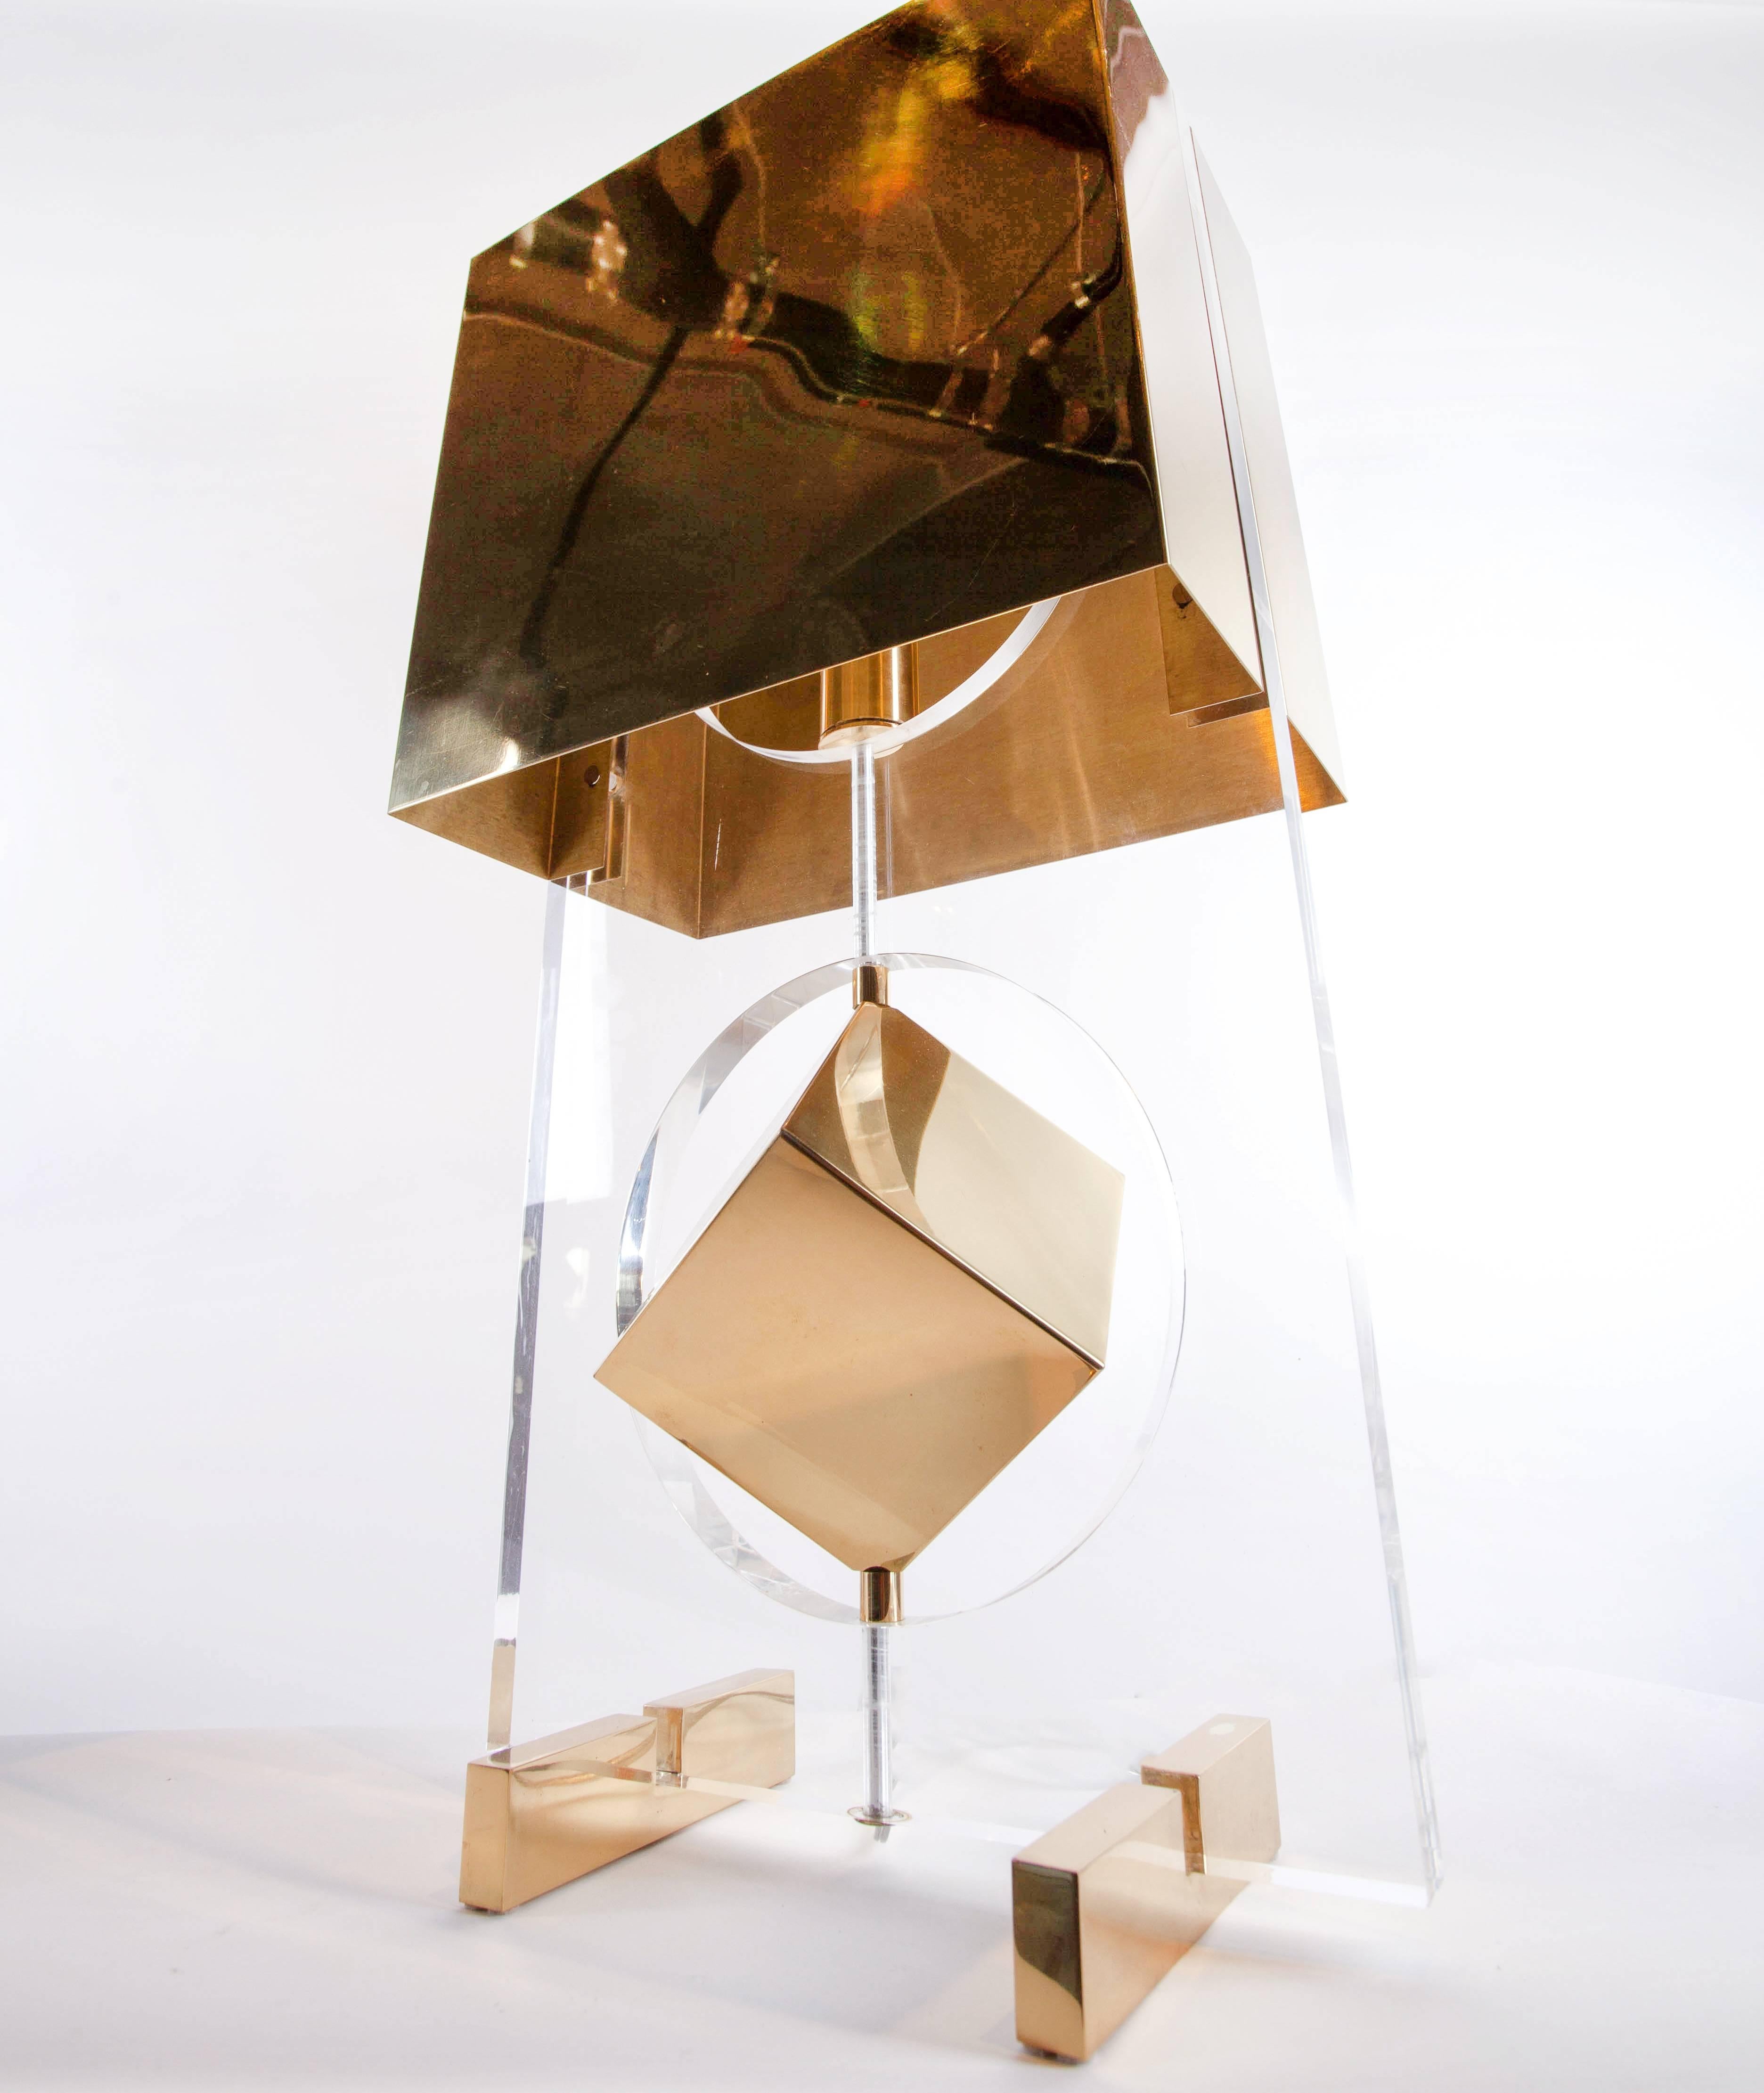 Unusual brass and acrylic lamp with a cube suspended in a center circular opening with brass shade, C. 1980s